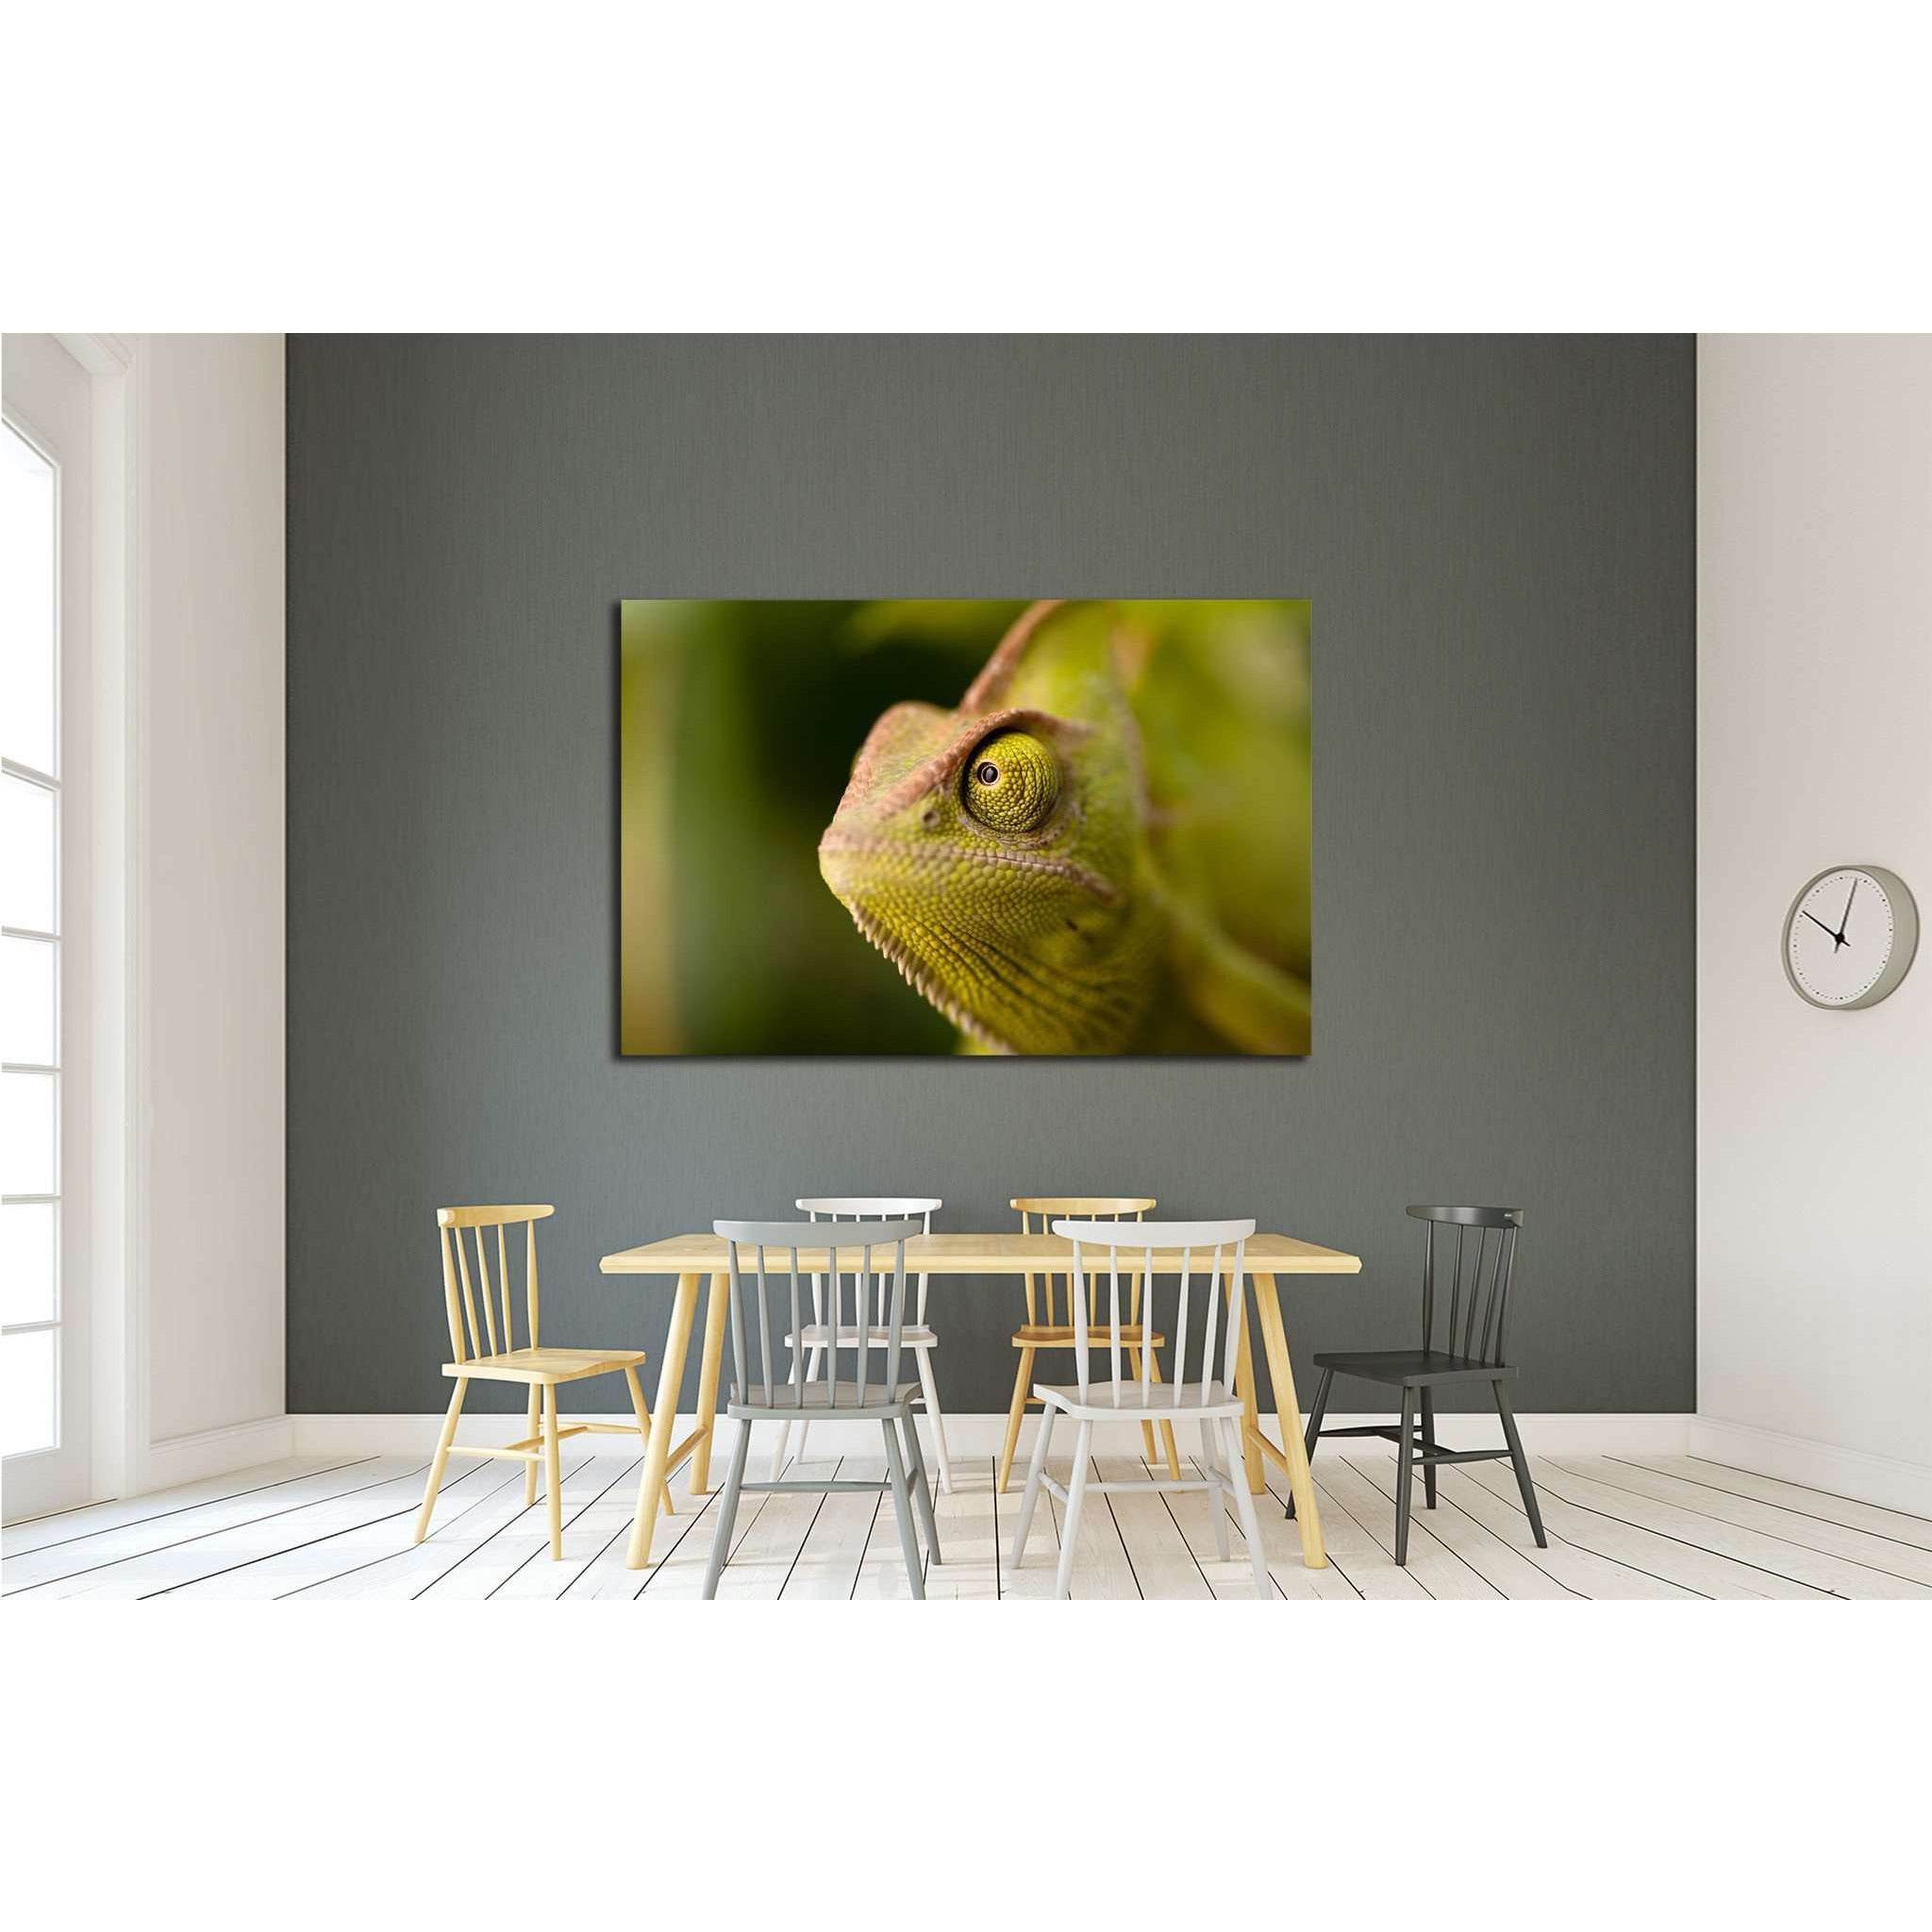 Green chameleon camouflaged by taking colors of its natural background №1829 Ready to Hang Canvas Print